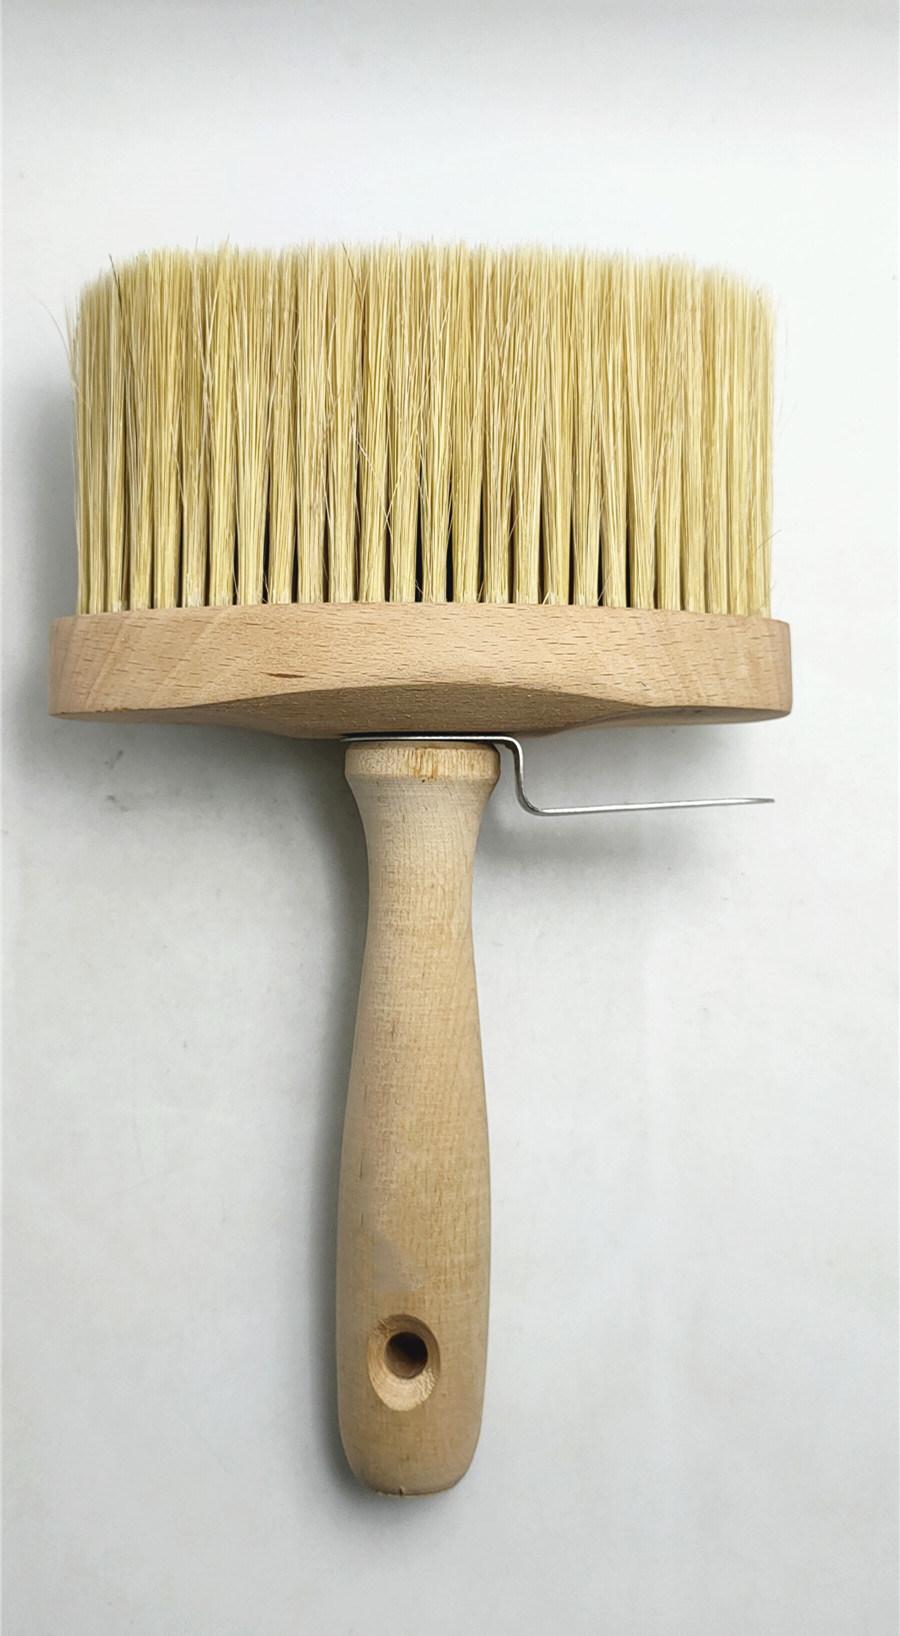 Professional Price Discount Hot Sale Factory Paint Brush